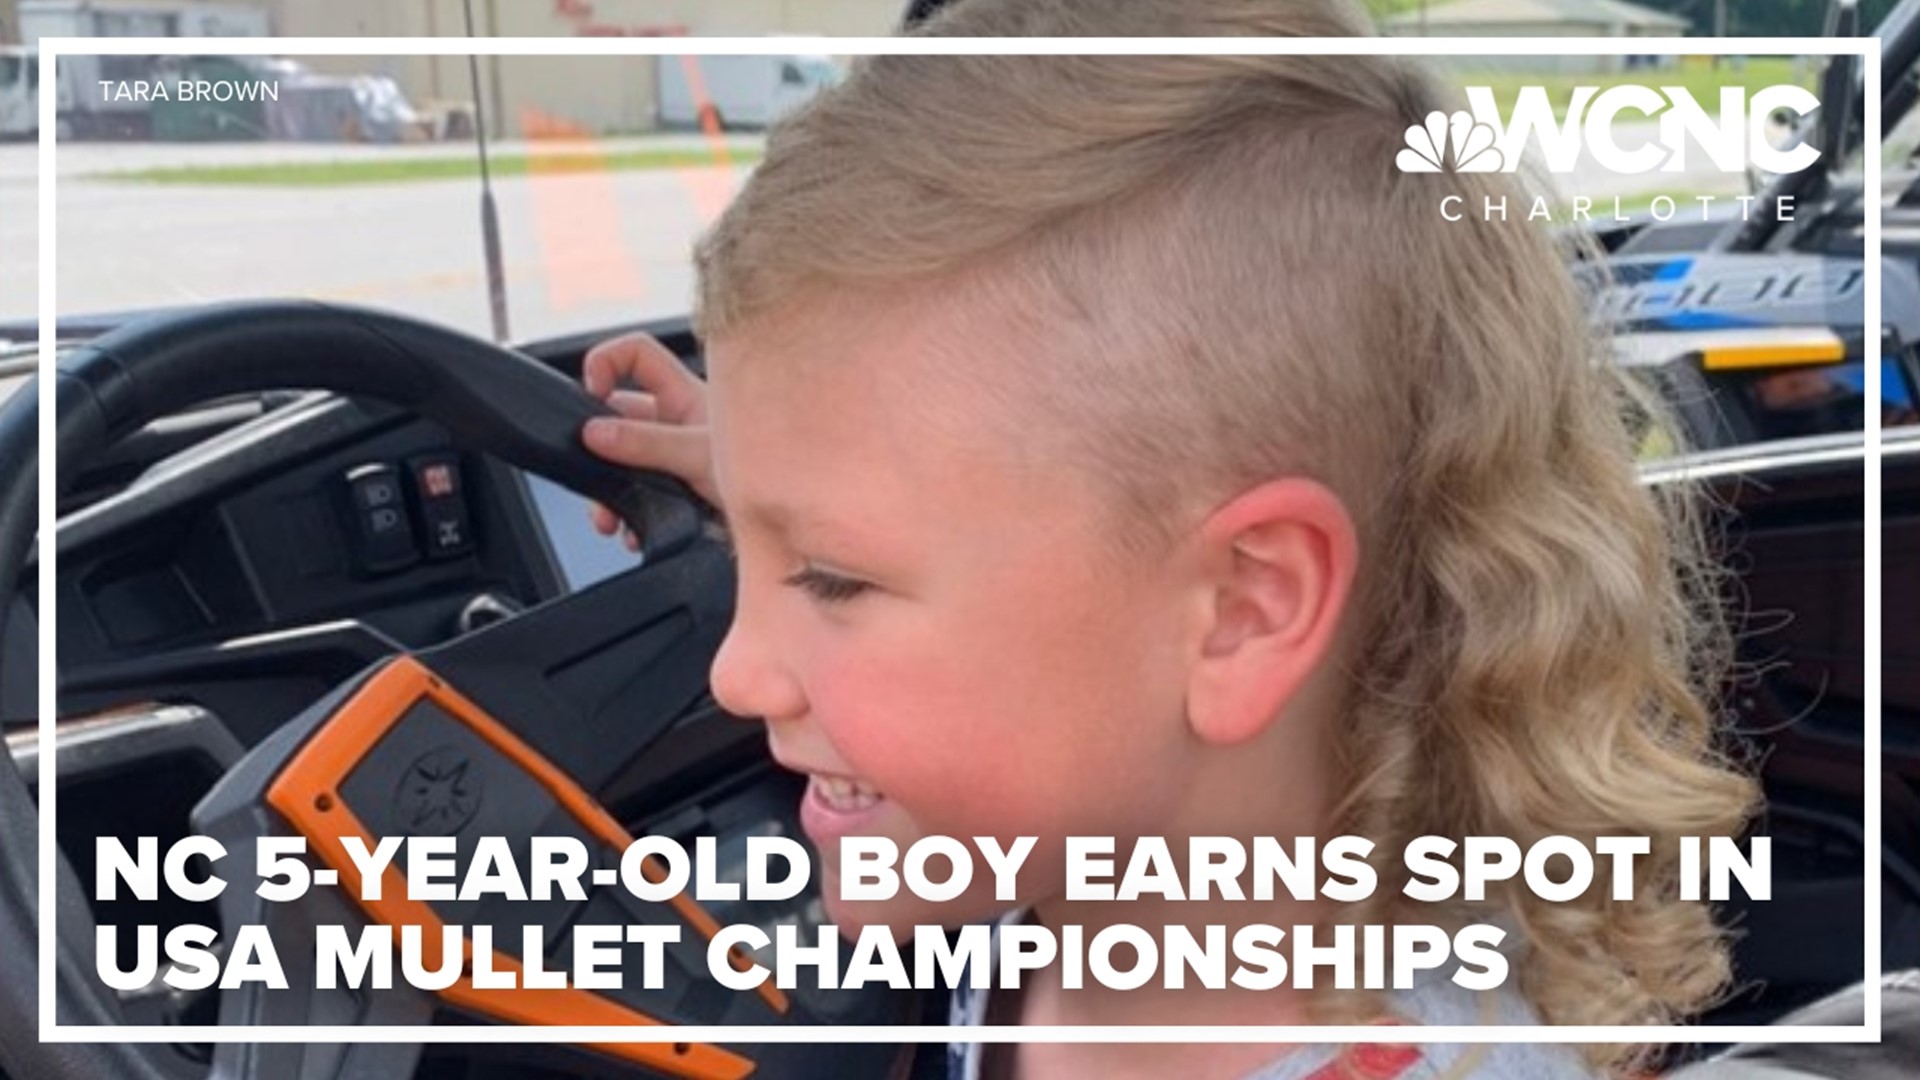 A 5-year-old in North Carolina has one of the best mullets in the country!